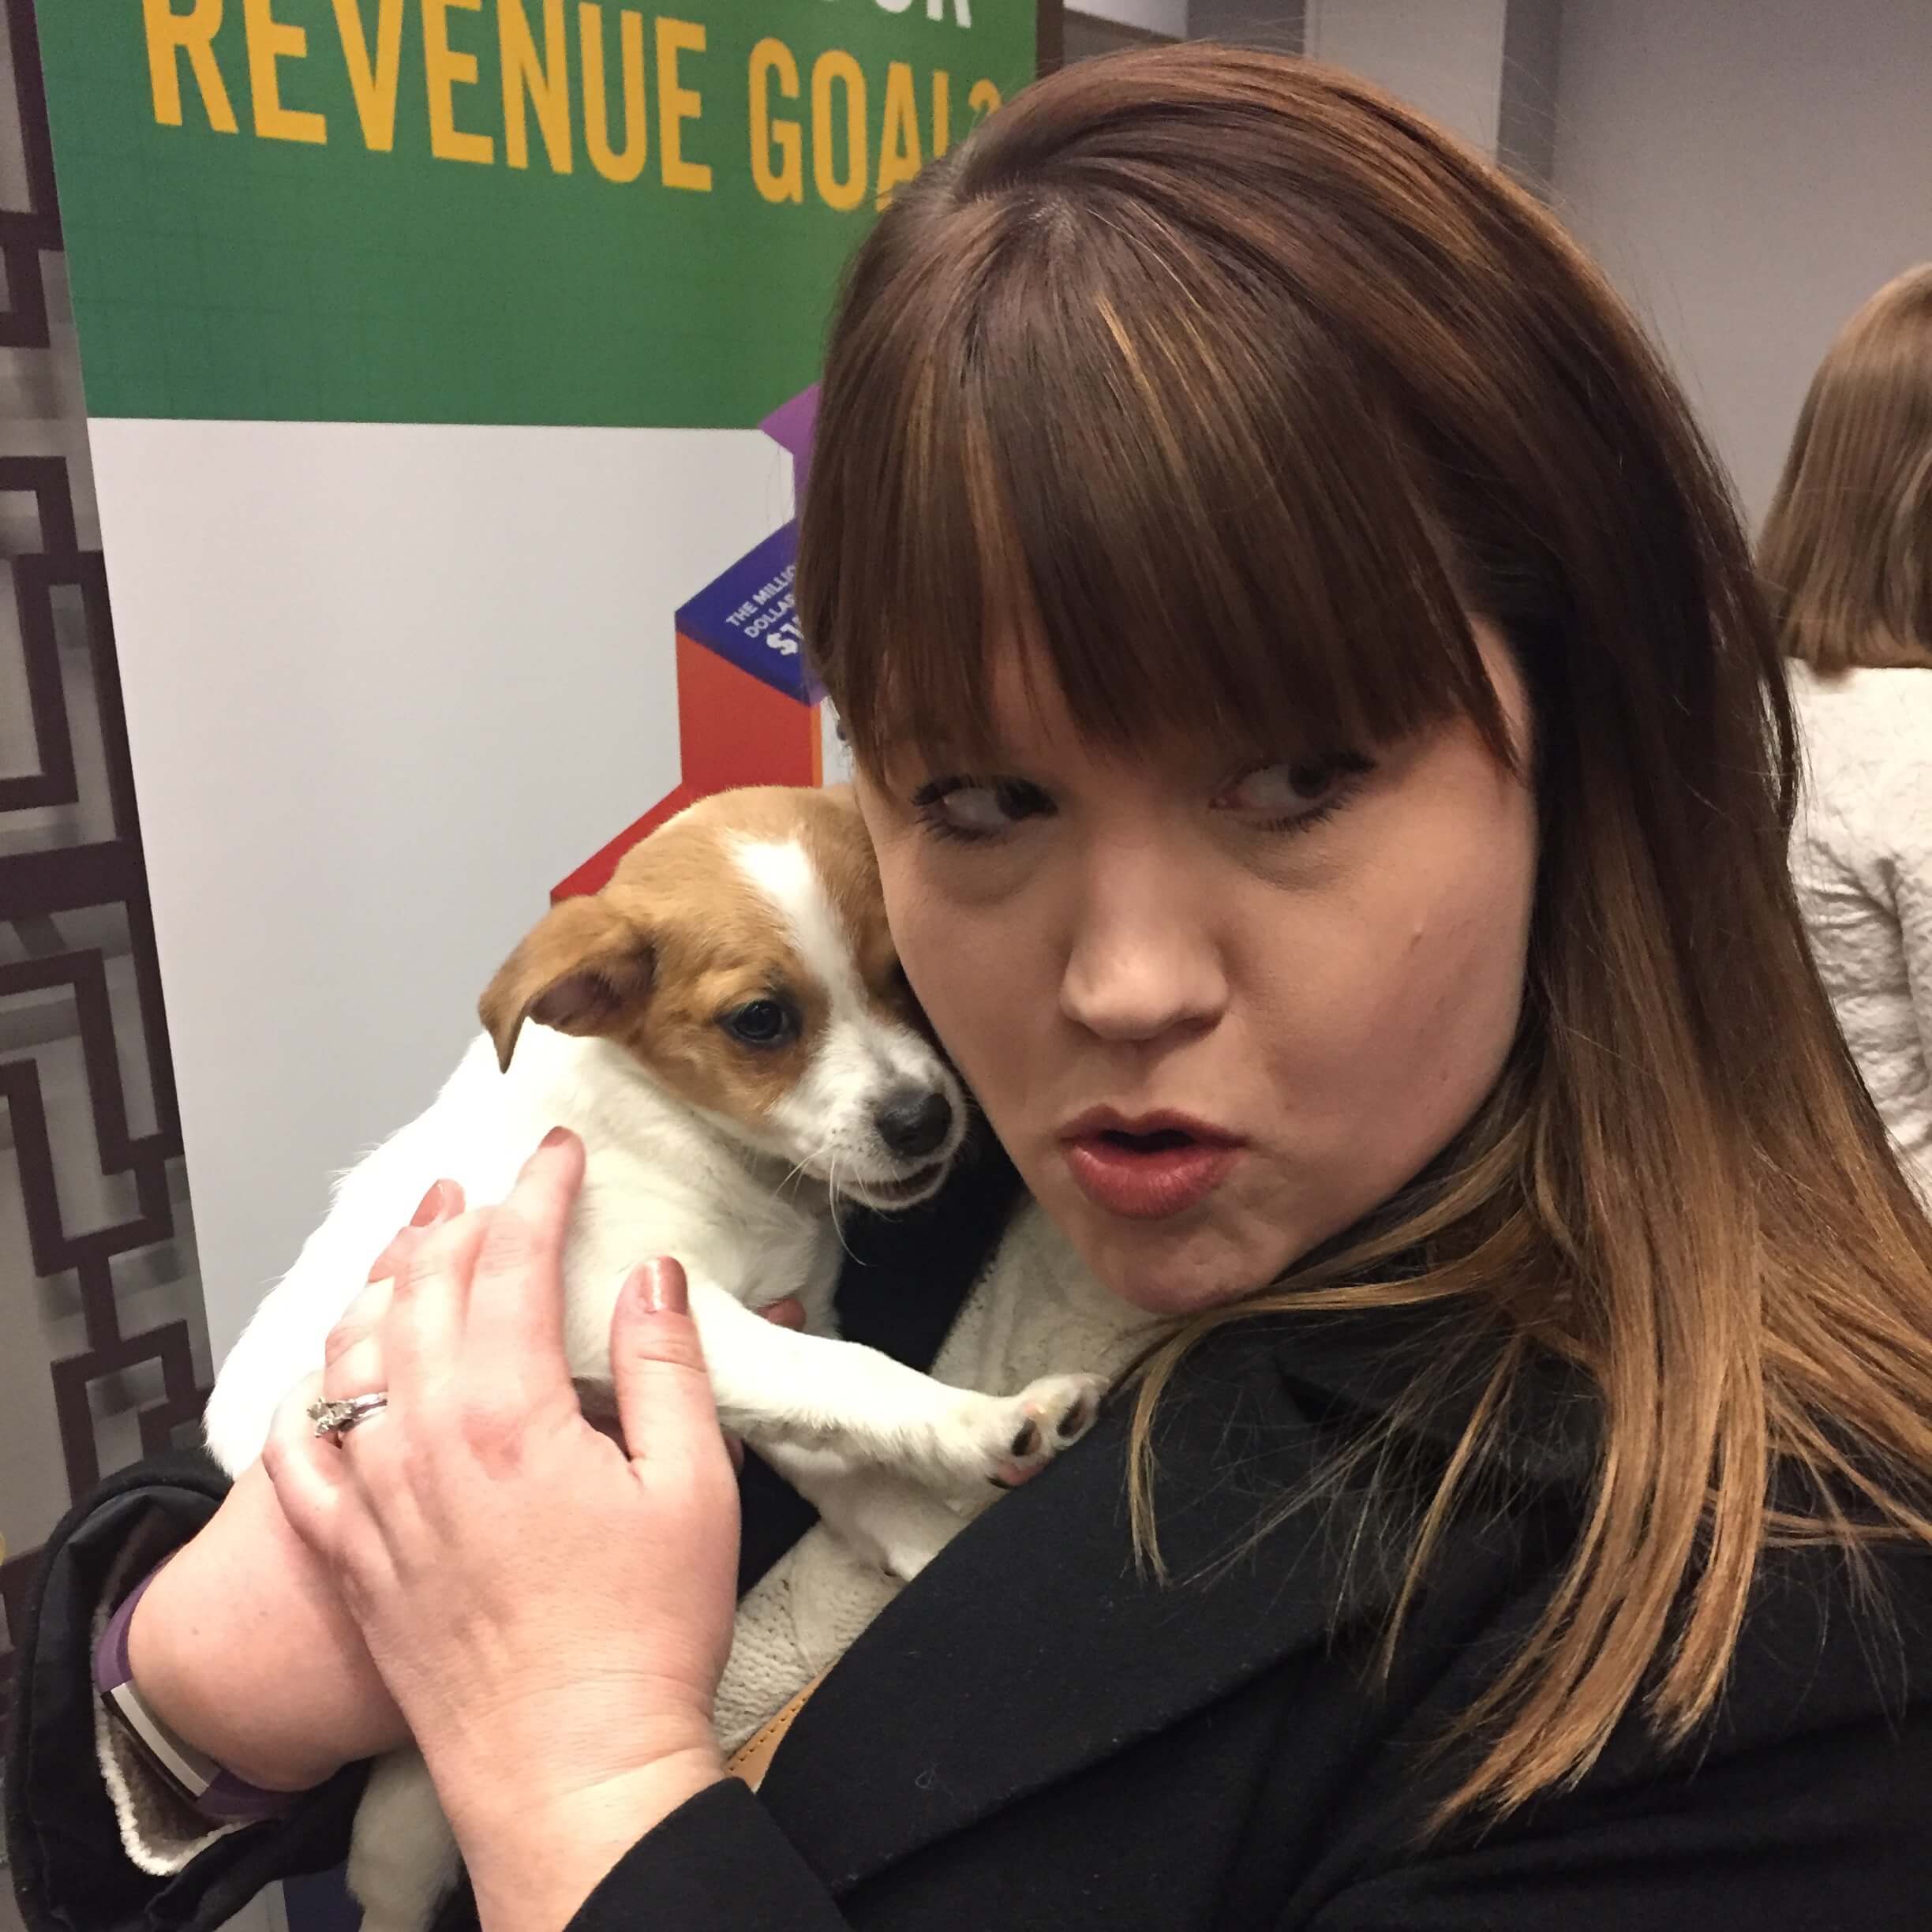 ABA Law Student Podcast host Sandy Gallant-Jones with a puppy.